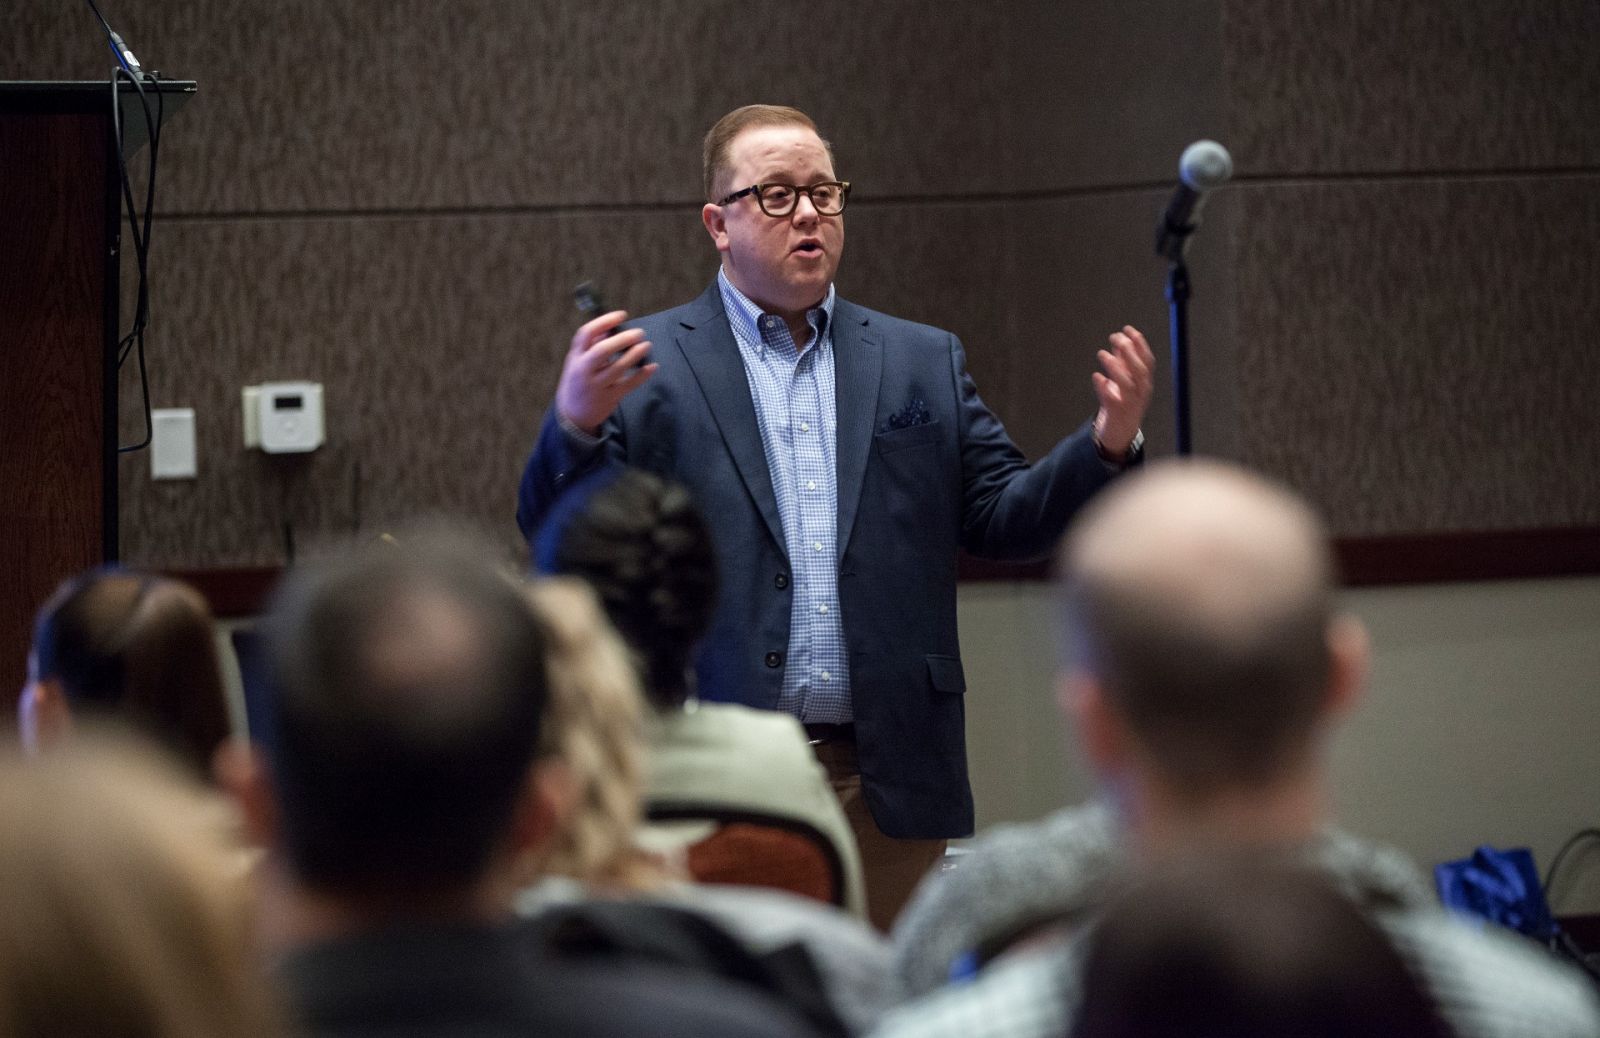 Chase Glenn, MUSC's first-ever director of LGBTQ Health Services and Enterprise Resources, speaks at the hospital's Inclusion to Innovation Summit in 2019. (Photo/Provided)